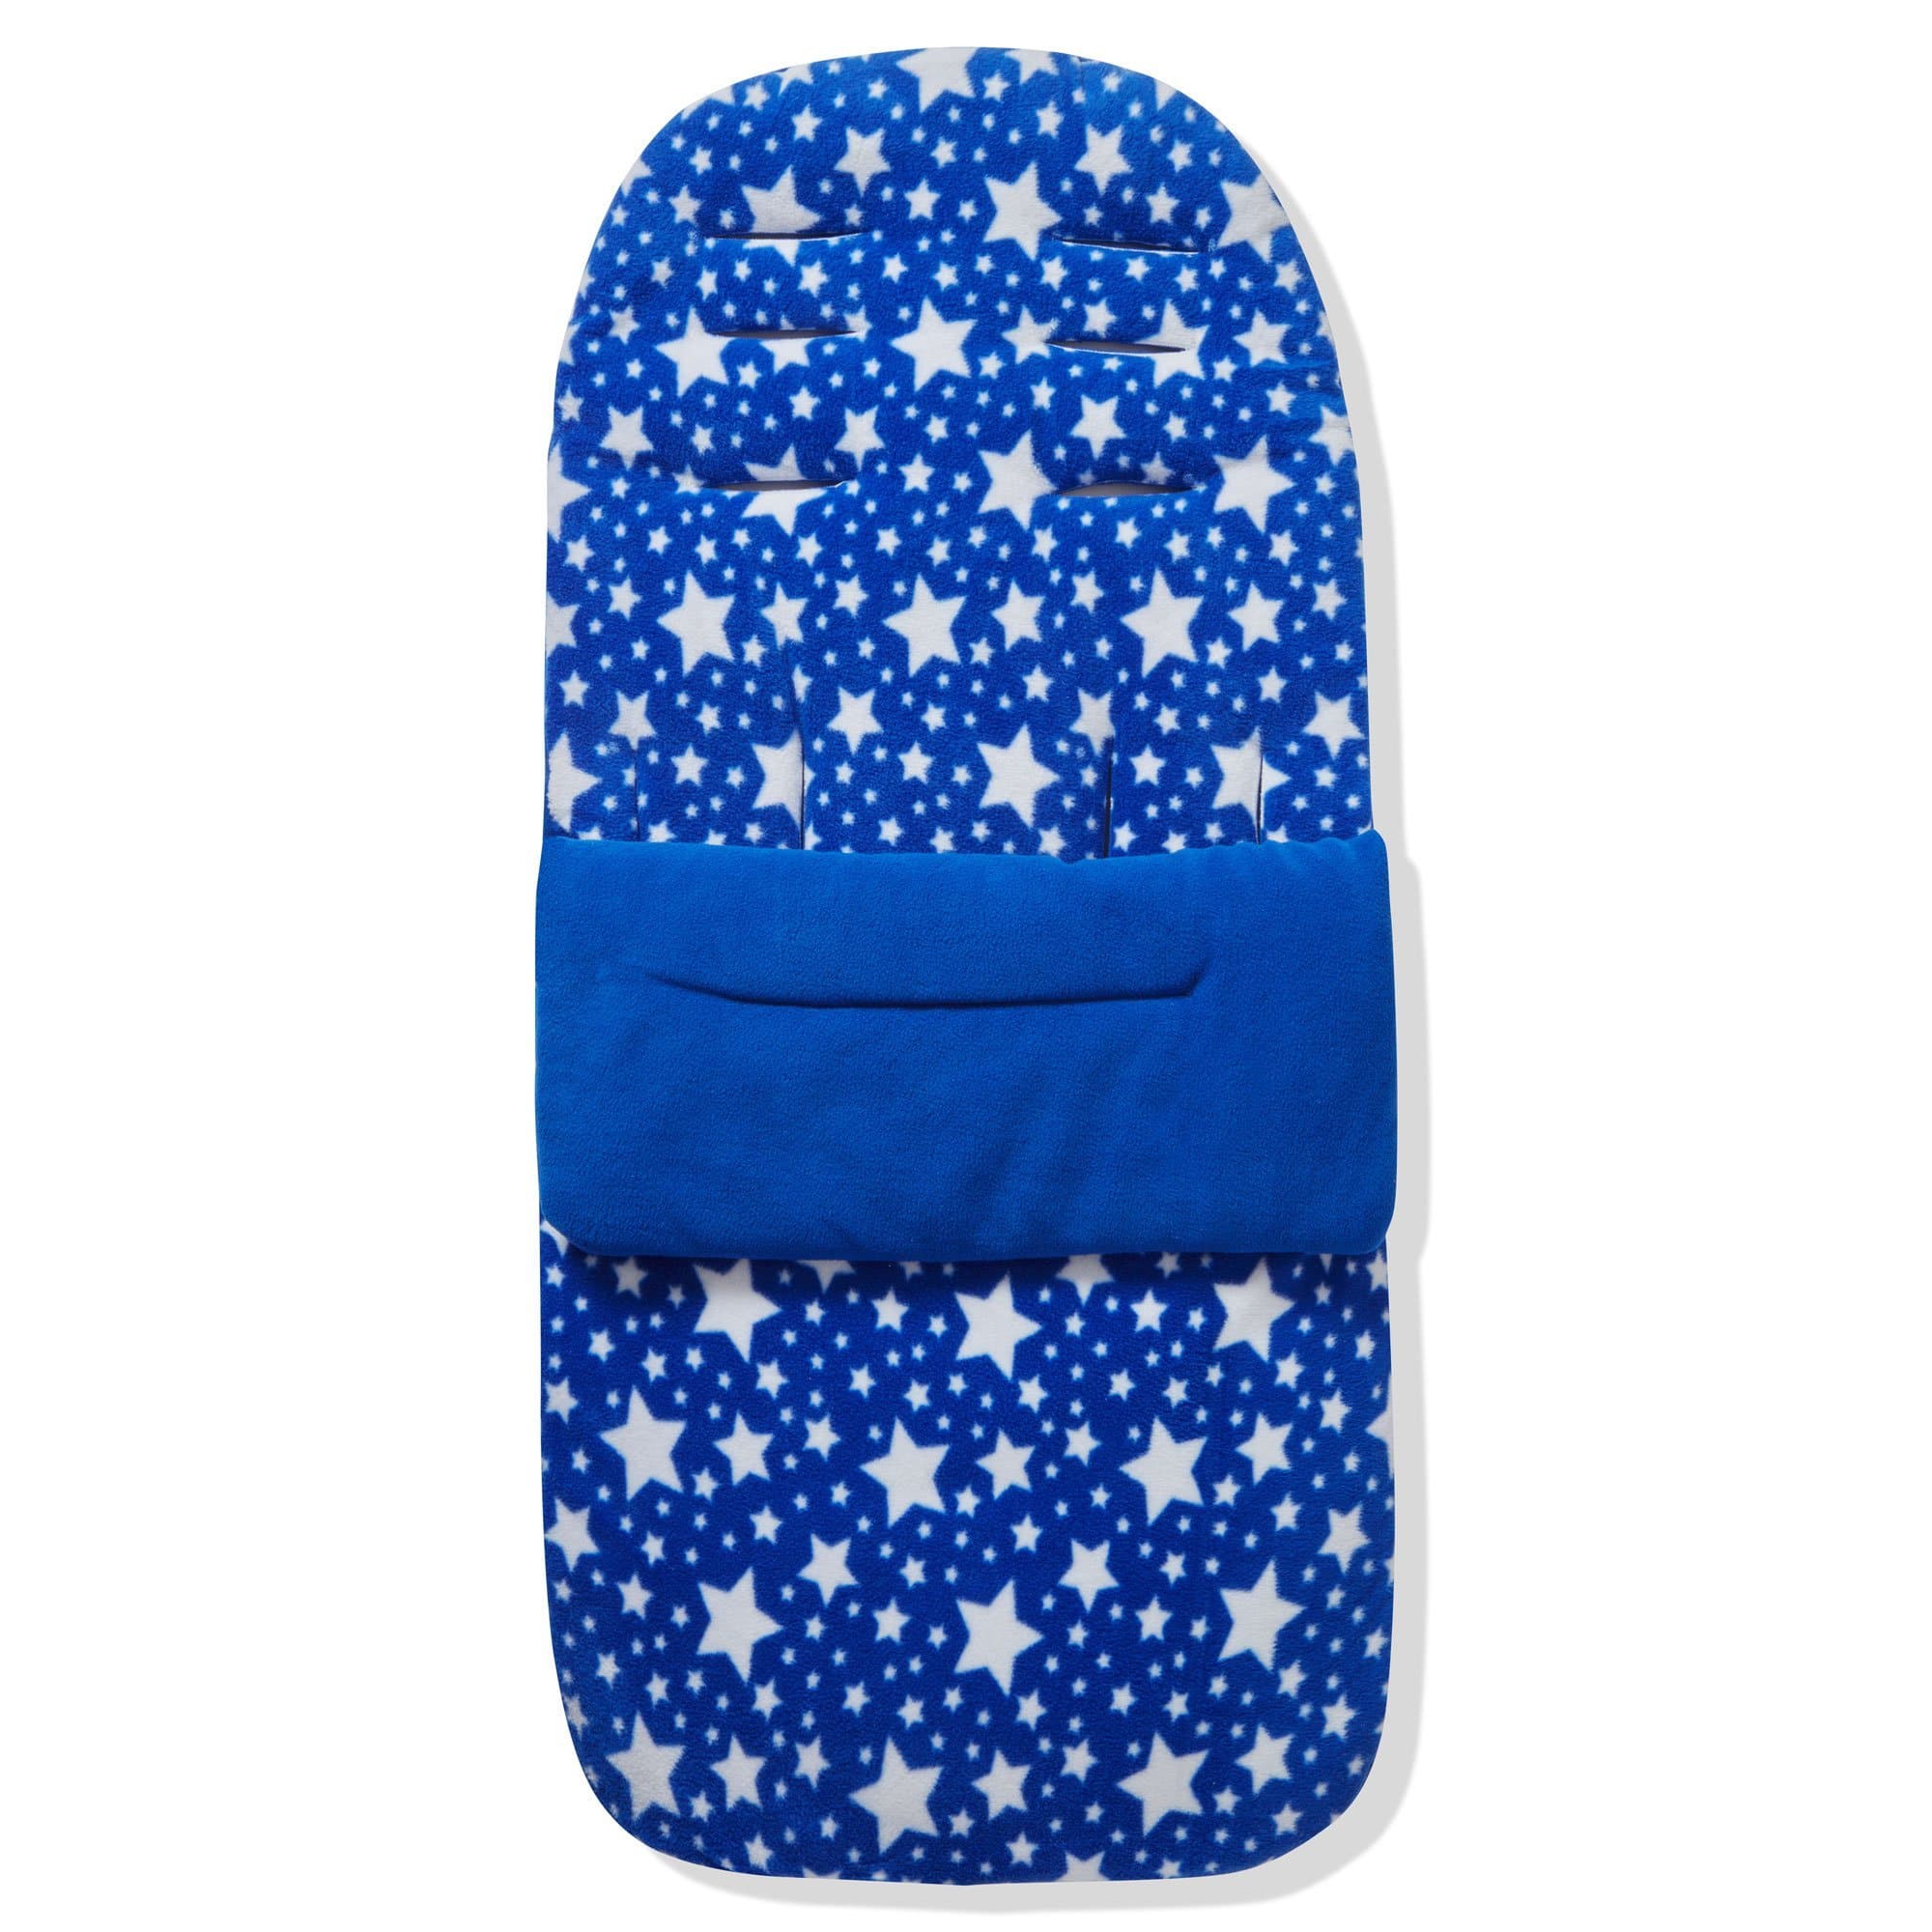 Fleece Footmuff / Cosy Toes Compatible With Cam - For Your Little One